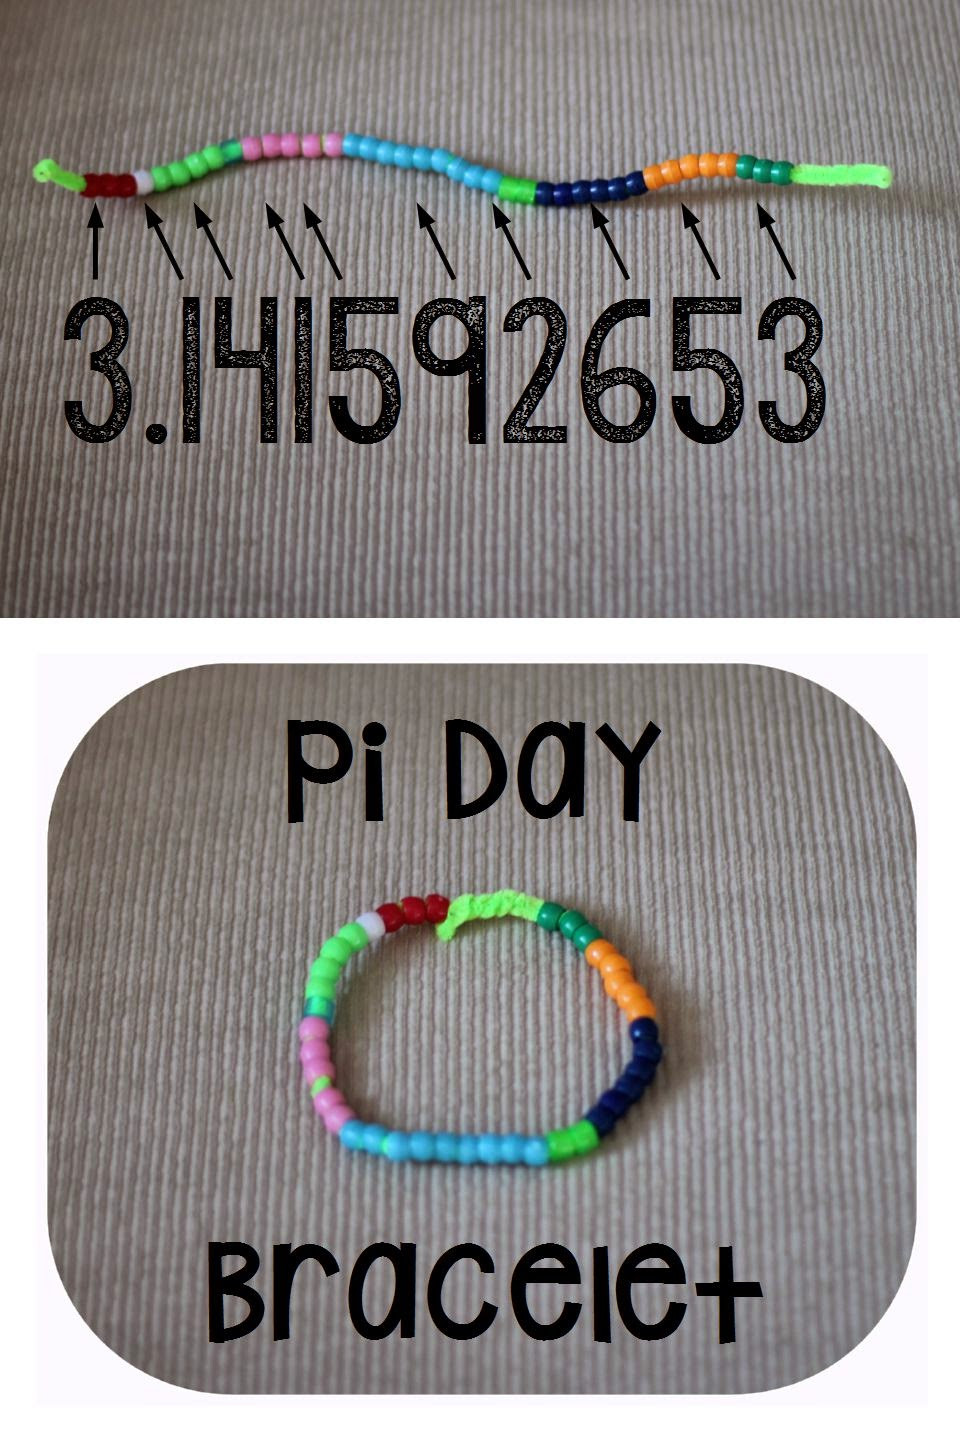 Creative Pi Day Ideas
 Pi Day is on its way Pi Day Activities momgineer